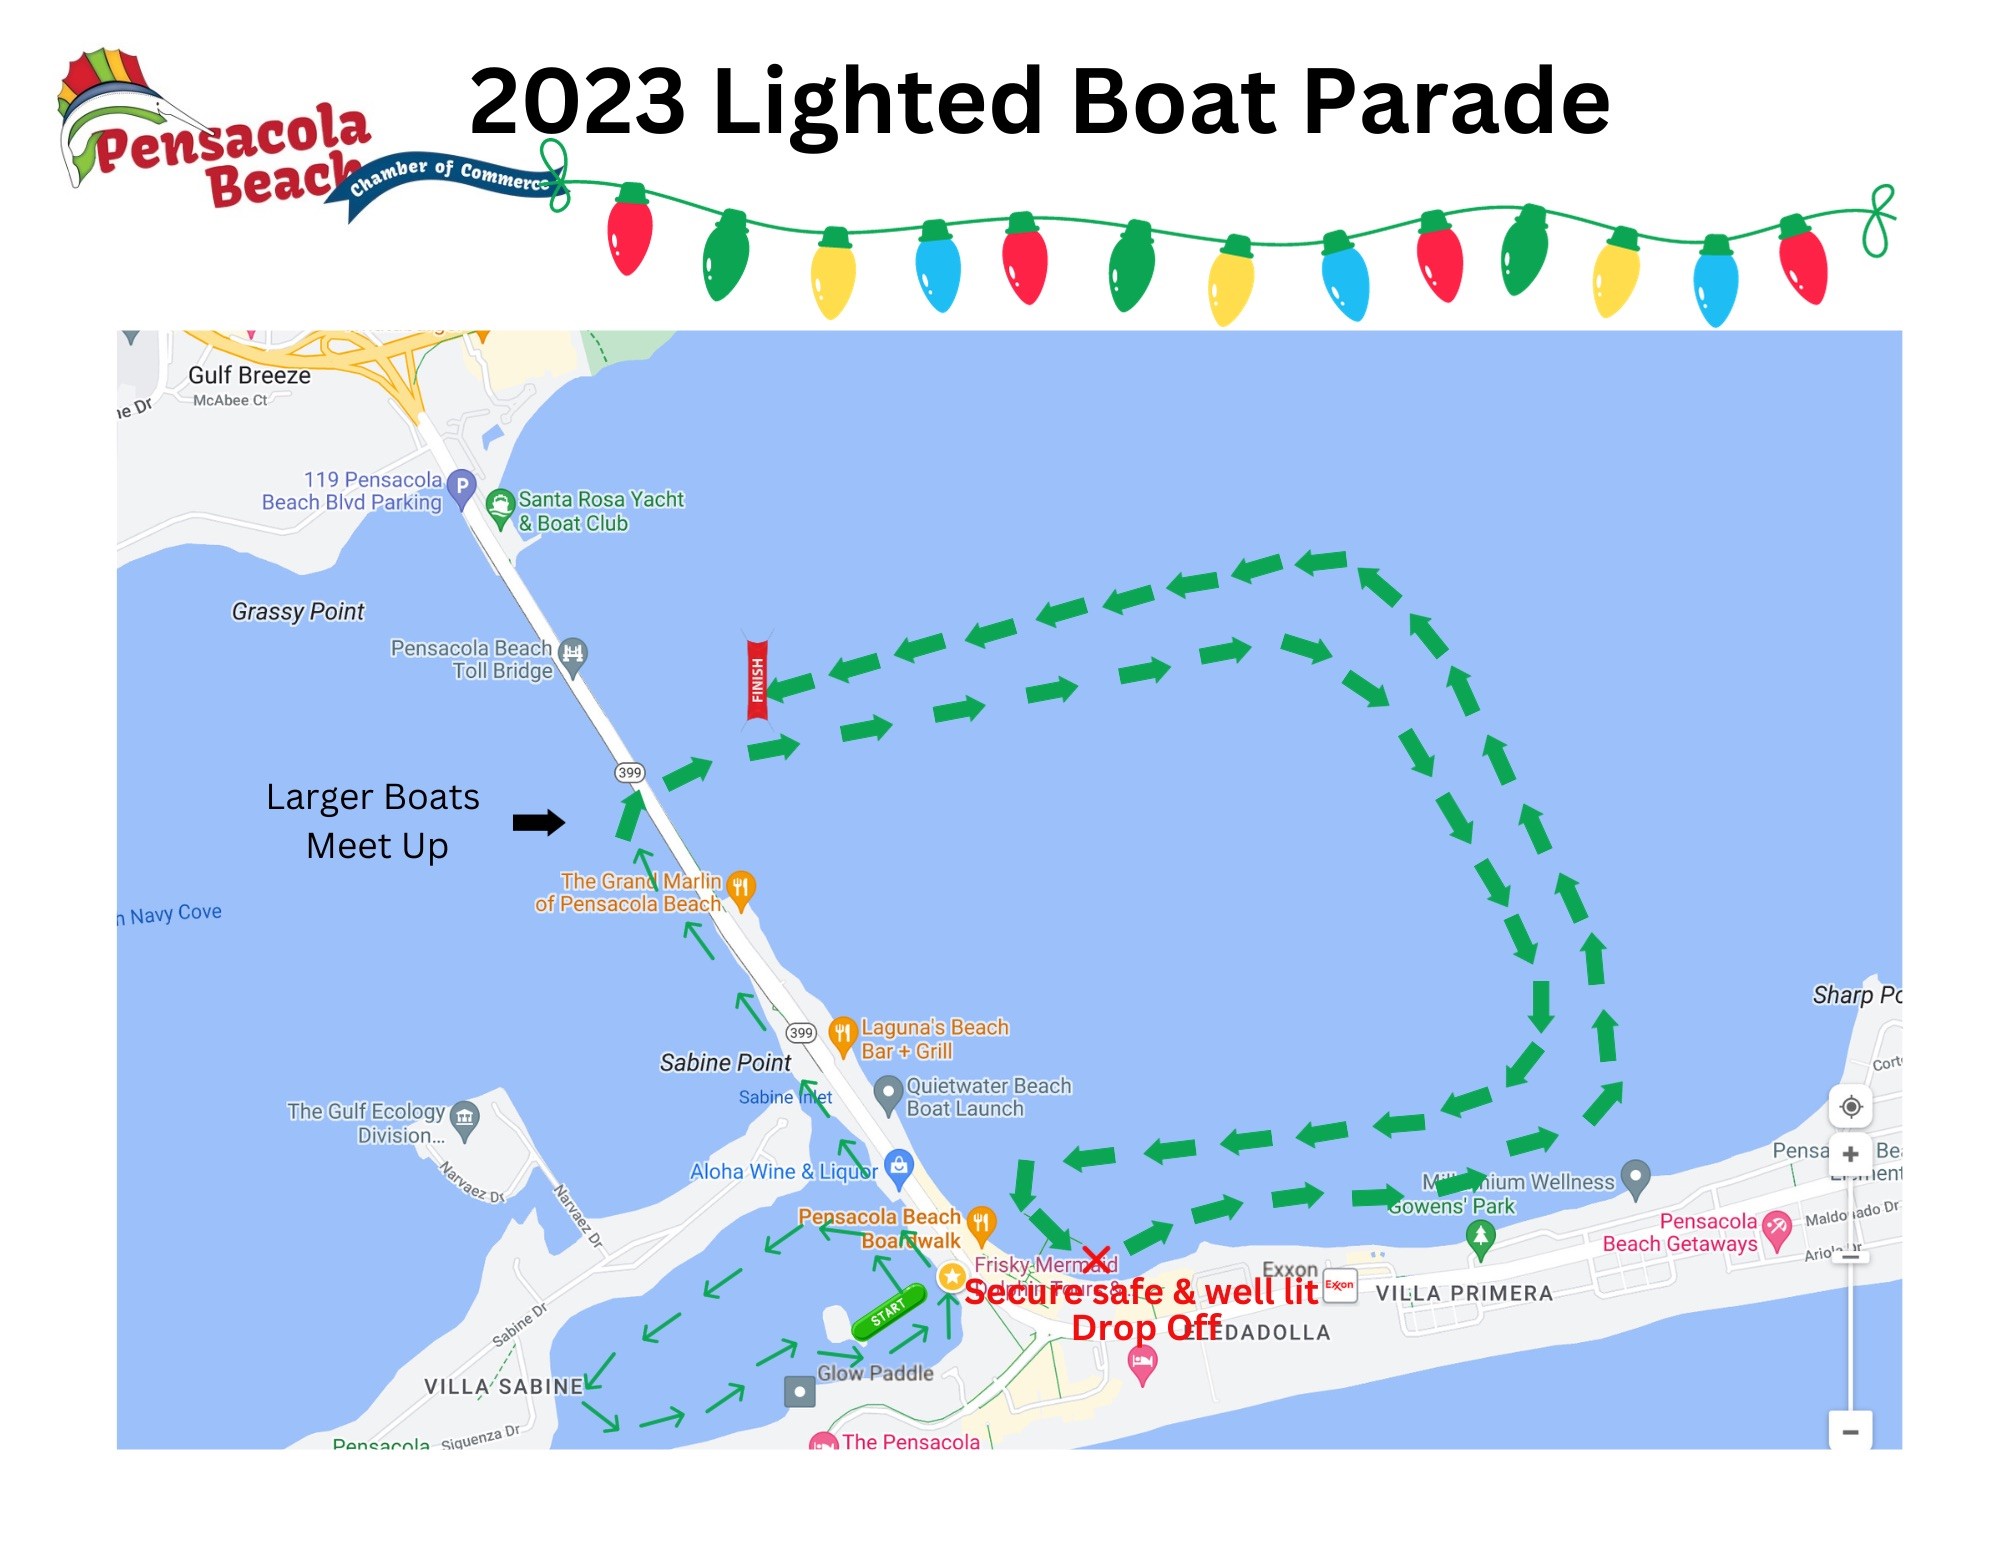 Lighted Boat parade route